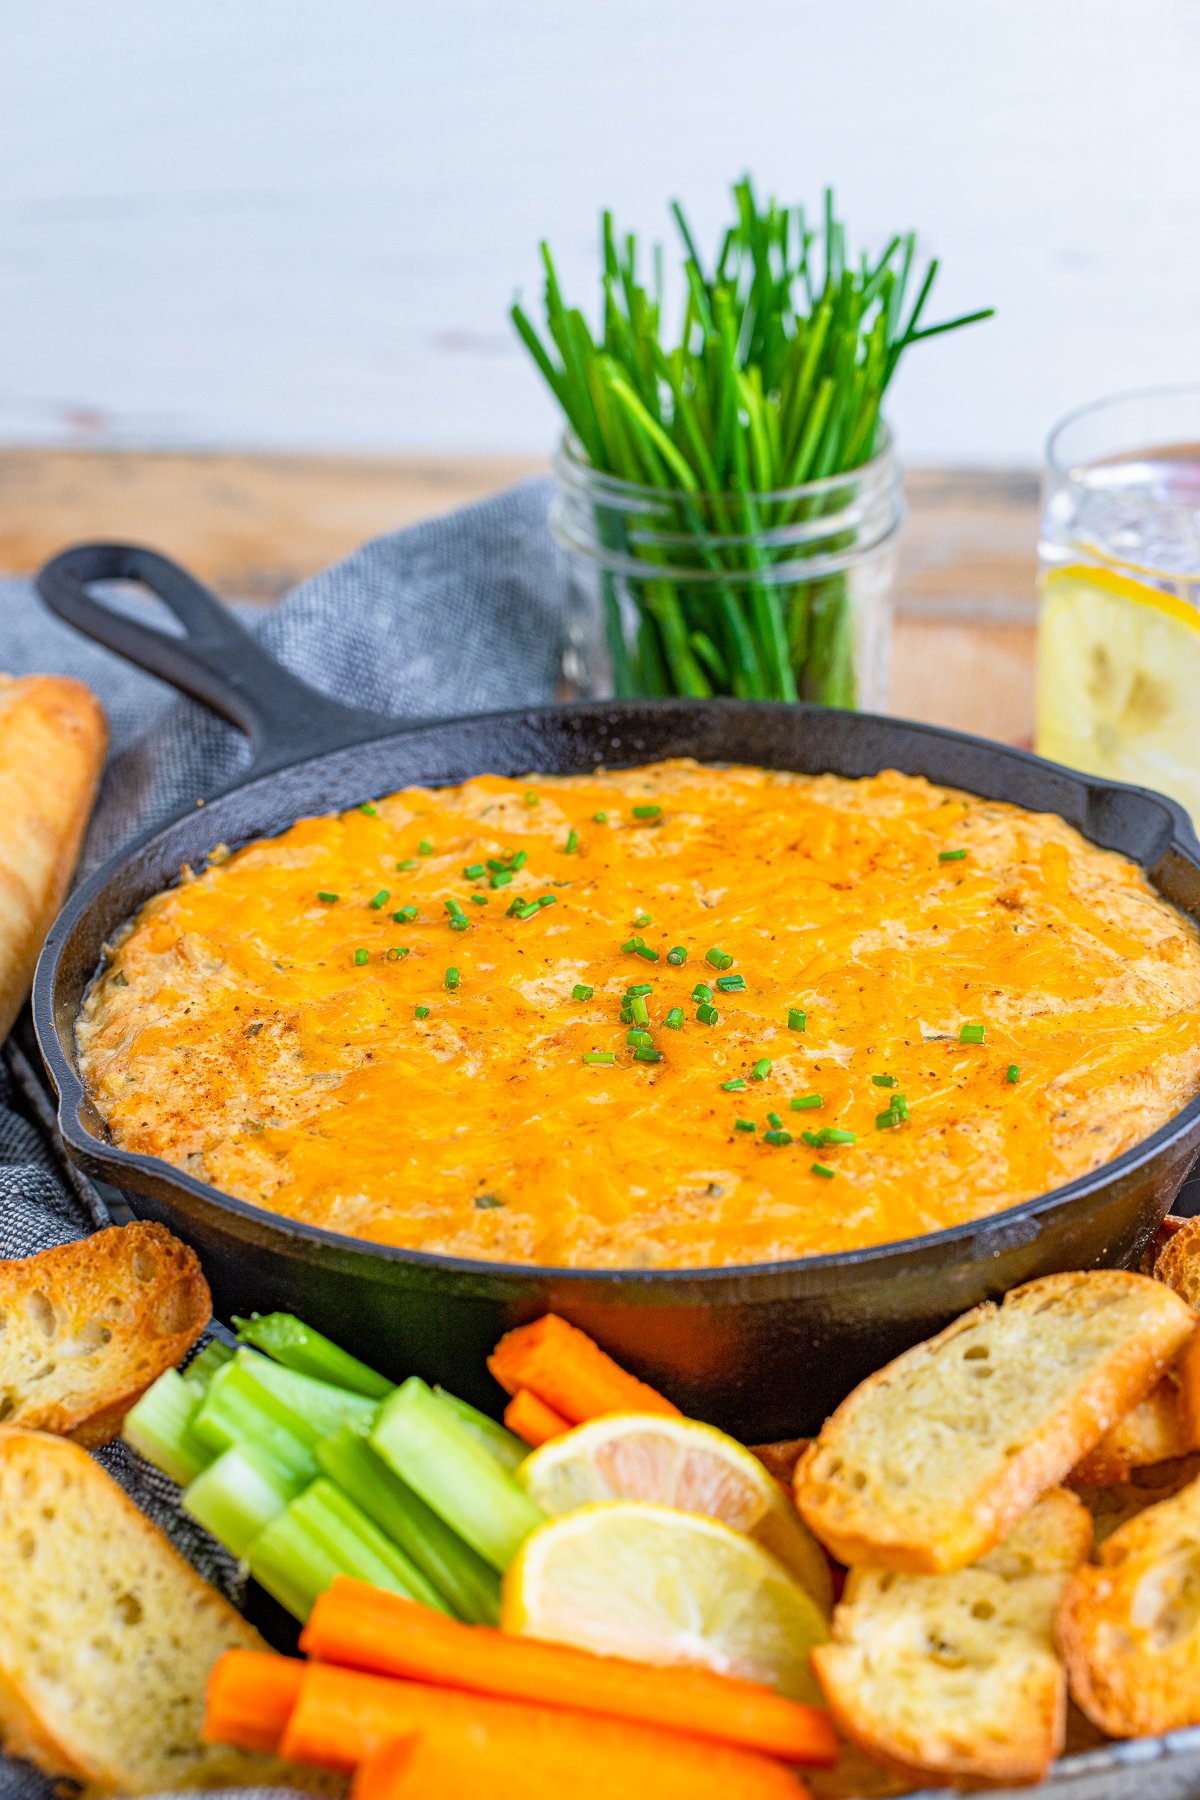 Smoked Crab Dip Recipe finished topped with chives in cast iron skillet.